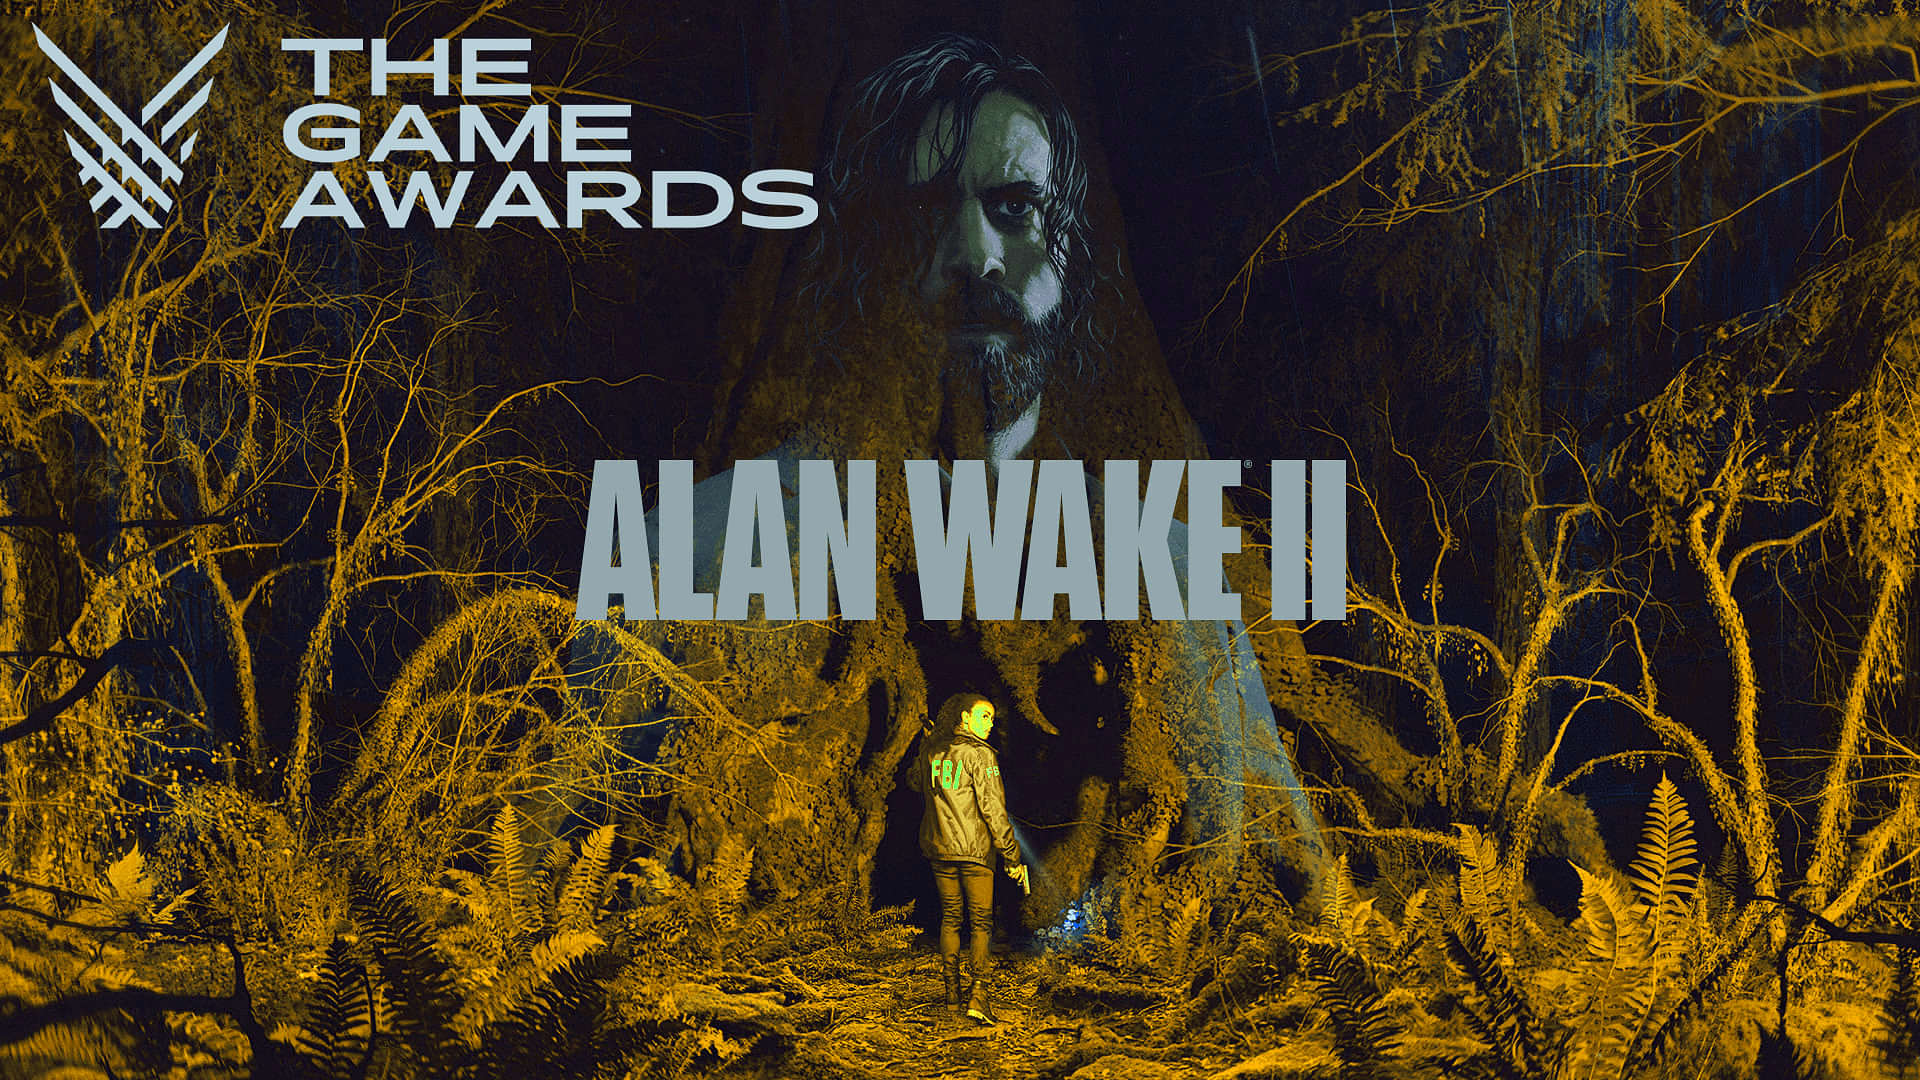 An image showing Alan Wake 2 cover with golden theme for GOTY and The Game Awards logo